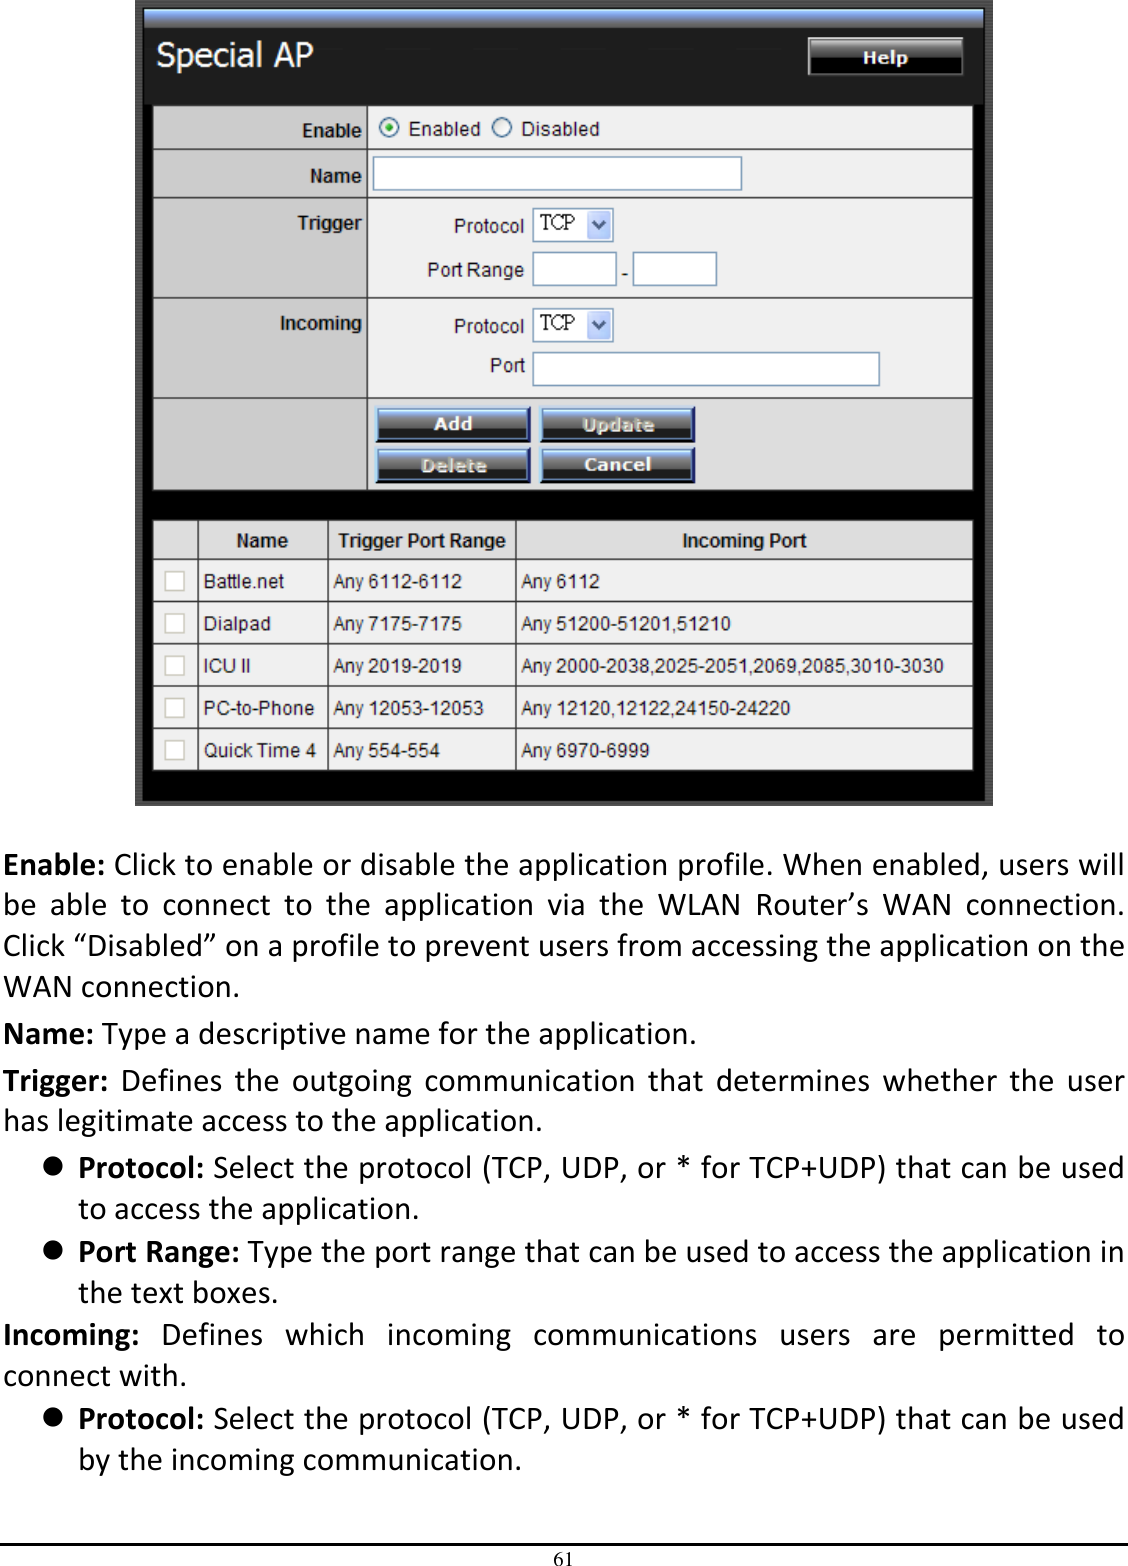 61   Enable: Click to enable or disable the application profile. When enabled, users will be  able  to  connect  to  the  application  via  the  WLAN  Router’s  WAN  connection. Click “Disabled” on a profile to prevent users from accessing the application on the WAN connection. Name: Type a descriptive name for the application. Trigger:  Defines  the  outgoing  communication  that  determines  whether  the  user has legitimate access to the application.  Protocol: Select the protocol (TCP, UDP, or * for TCP+UDP) that can be used to access the application.  Port Range: Type the port range that can be used to access the application in the text boxes. Incoming:  Defines  which  incoming  communications  users  are  permitted  to connect with.  Protocol: Select the protocol (TCP, UDP, or * for TCP+UDP) that can be used by the incoming communication. 